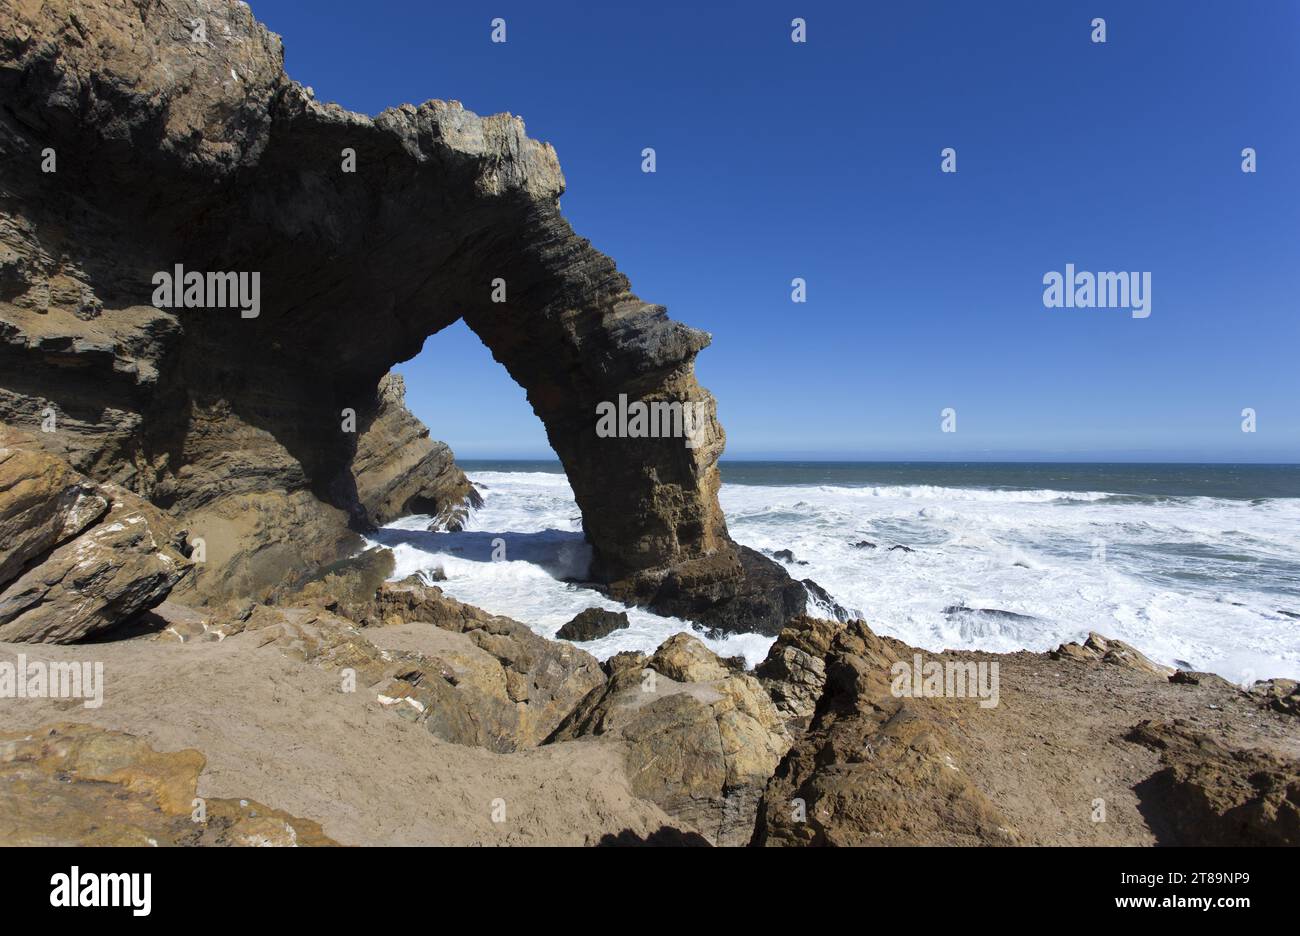 A view of Bogenfels arch at Luderitz, Namibia Stock Photo